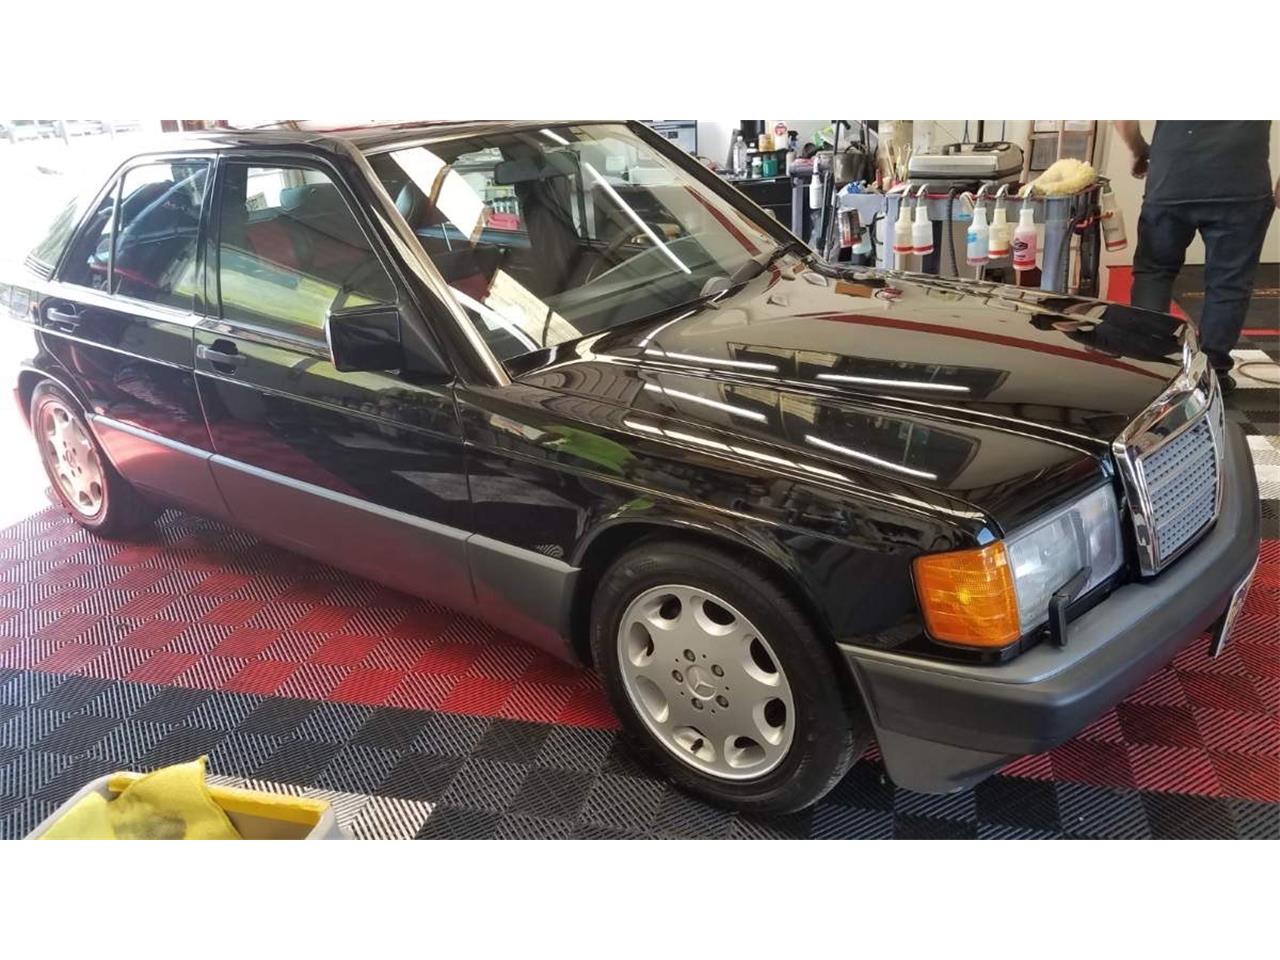 1993 Mercedes-Benz 190E 2 6 for sale in Ashland, OR